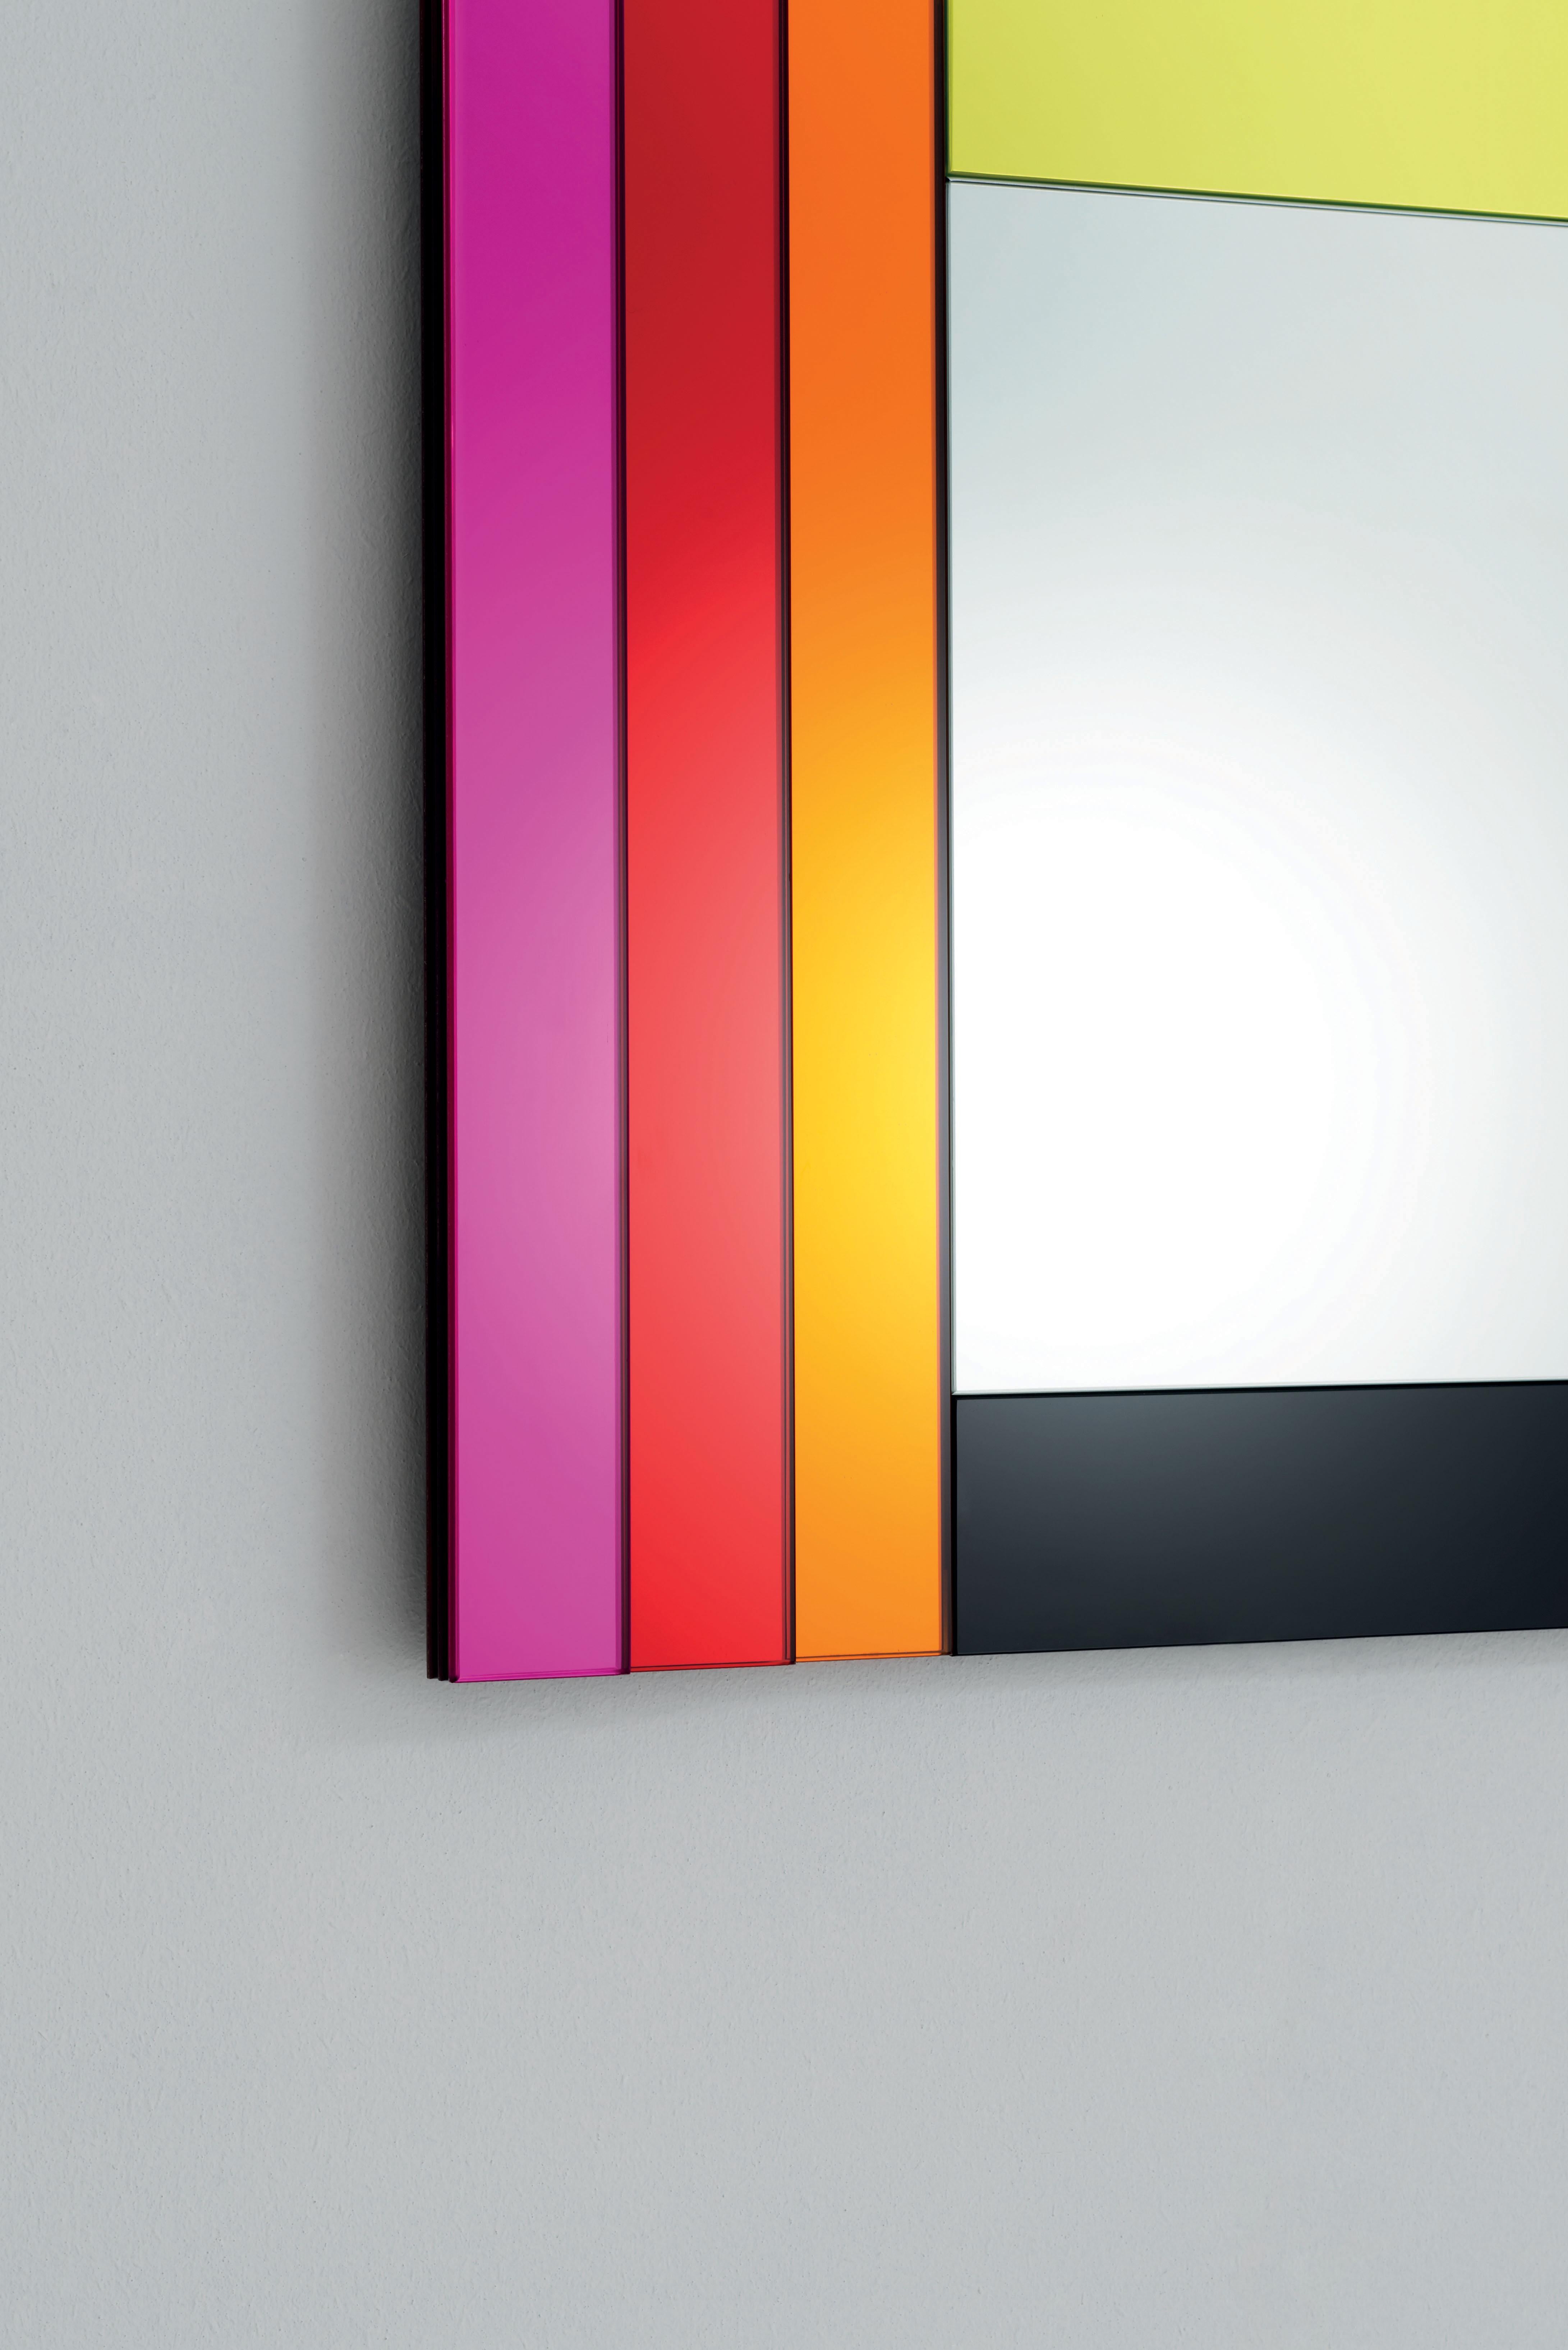 Dioniso3 Gli Specchi di Dioniso wall mirror is from a collection of 6 wall mirrors in different shapes and sizes characterizes by polychromatic frames composed of elements in laminated coloured mirror, coloured laminated glass and lacquered